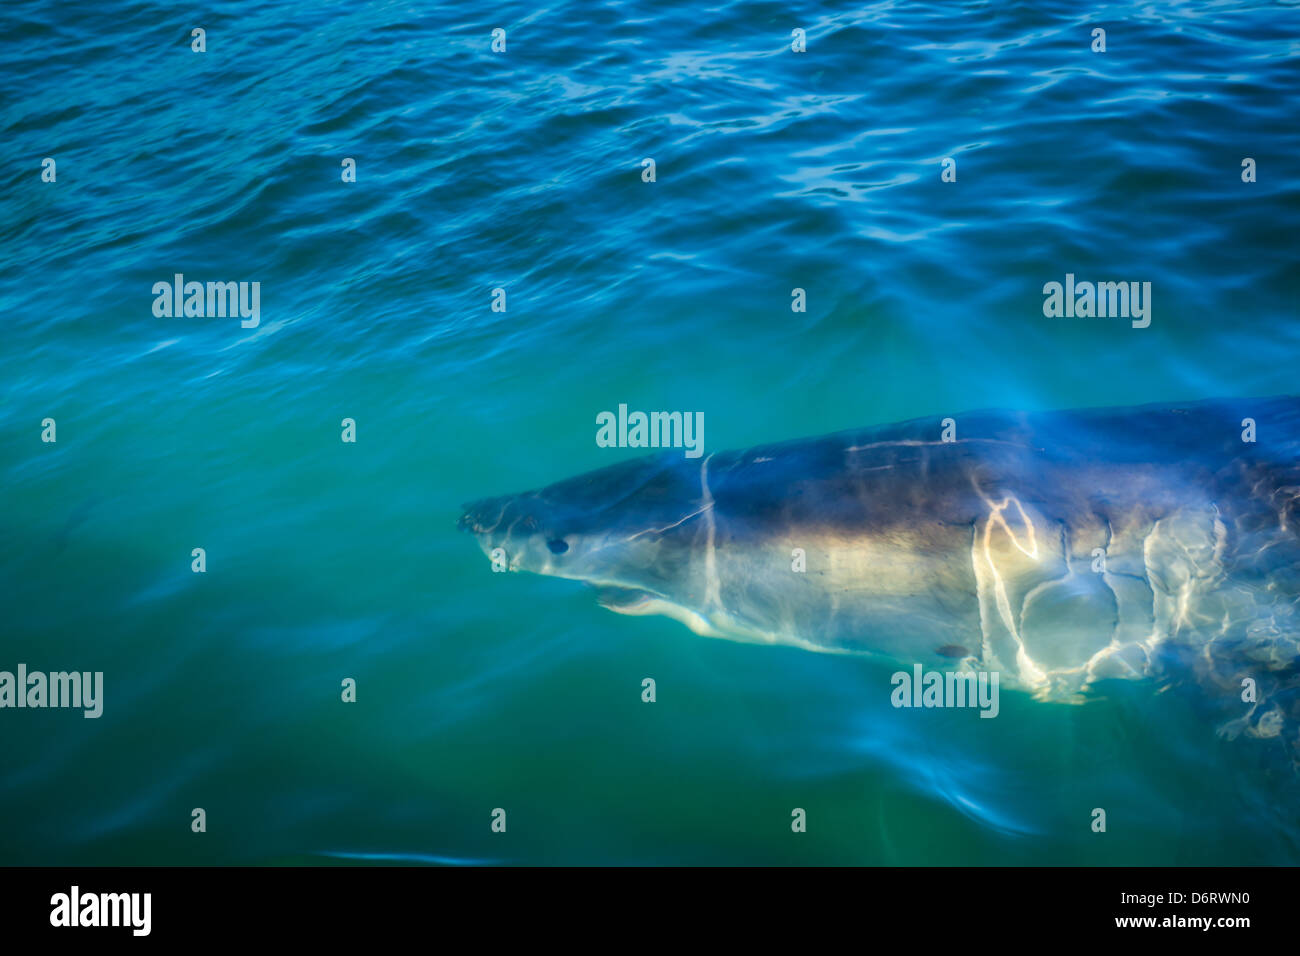 Closeup of head and open mouth of great white shark circling diver's cage in ocean water off coast of South Africa Stock Photo